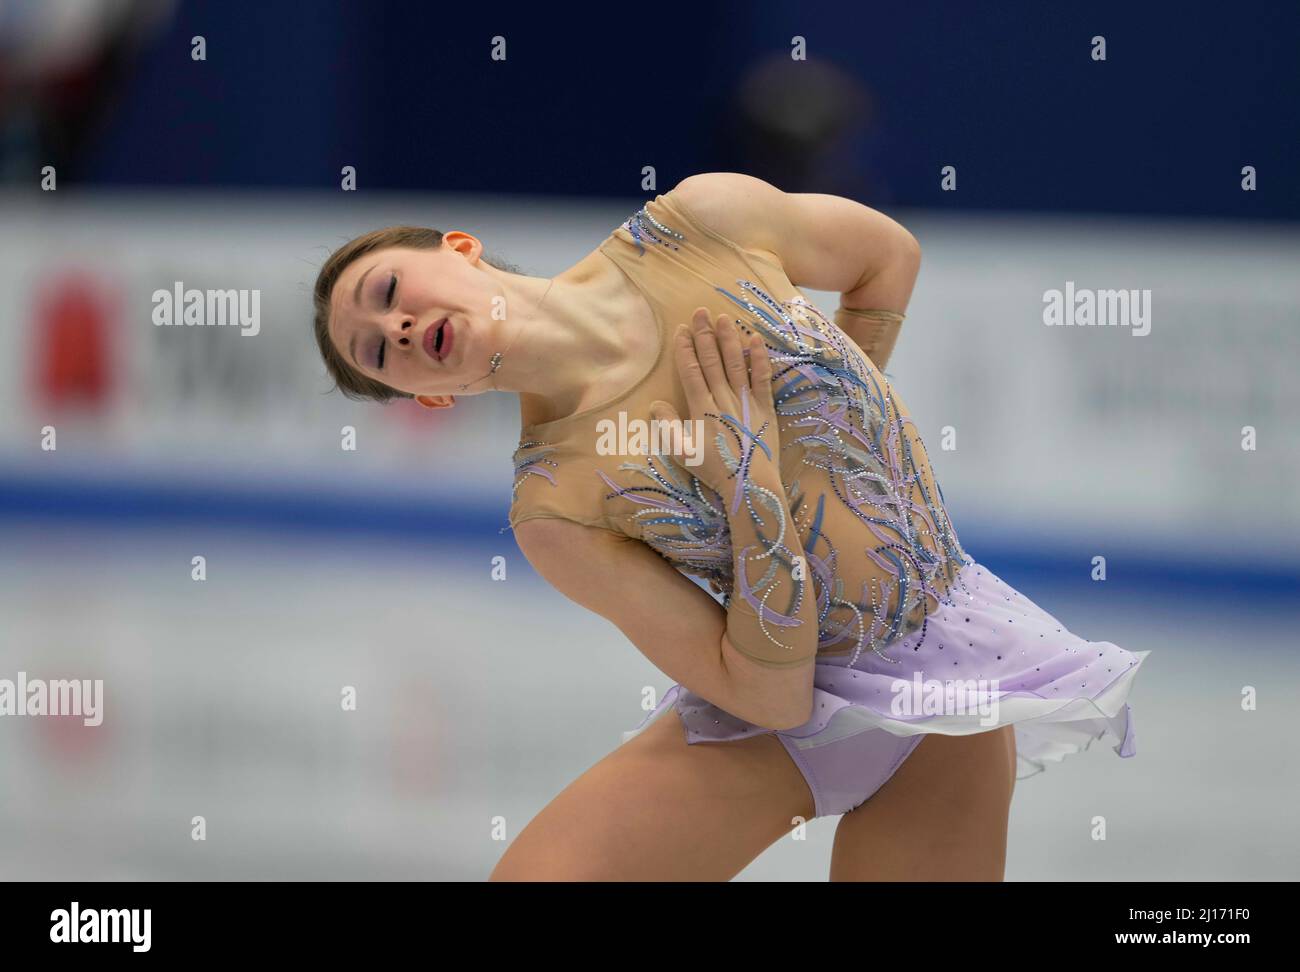 Sud de France Arena, Montpellier, France. 23rd Mar, 2022. Jenni Saarinen  from Finland during Women's Short Programme, World Figure Skating  Championship at Sud de France Arena, Montpellier, France. Kim  Price/CSM/Alamy Live News